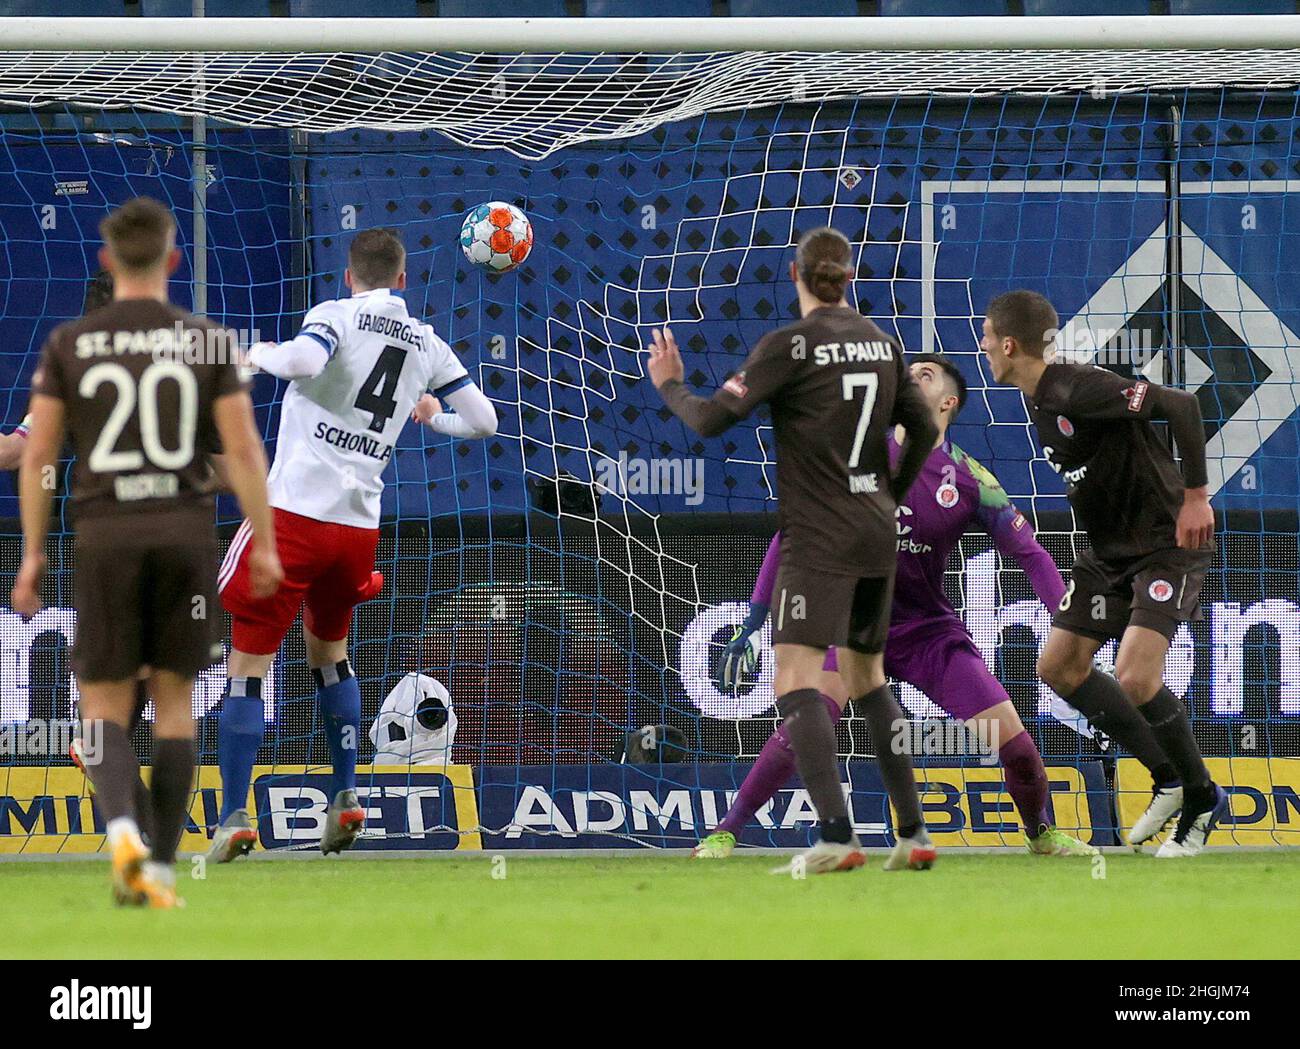 Hamburg, Germany. 21st Jan, 2022. Soccer, 2nd Bundesliga, Matchday 20, Hamburger SV - FC St. Pauli, Volksparkstadion: Hamburg defender Sebastian Schonlau (2nd from left) scores to make it 1:1. IMPORTANT NOTICE: In accordance with the requirements of the DFL Deutsche Fußball Liga and the DFB Deutscher Fußball-Bund, it is prohibited to exploit or have exploited photographs taken in the stadium and/or of the match in the form of sequence pictures and/or video-like photo series. Credit: Christian Charisius/dpa/Alamy Live News Stock Photo